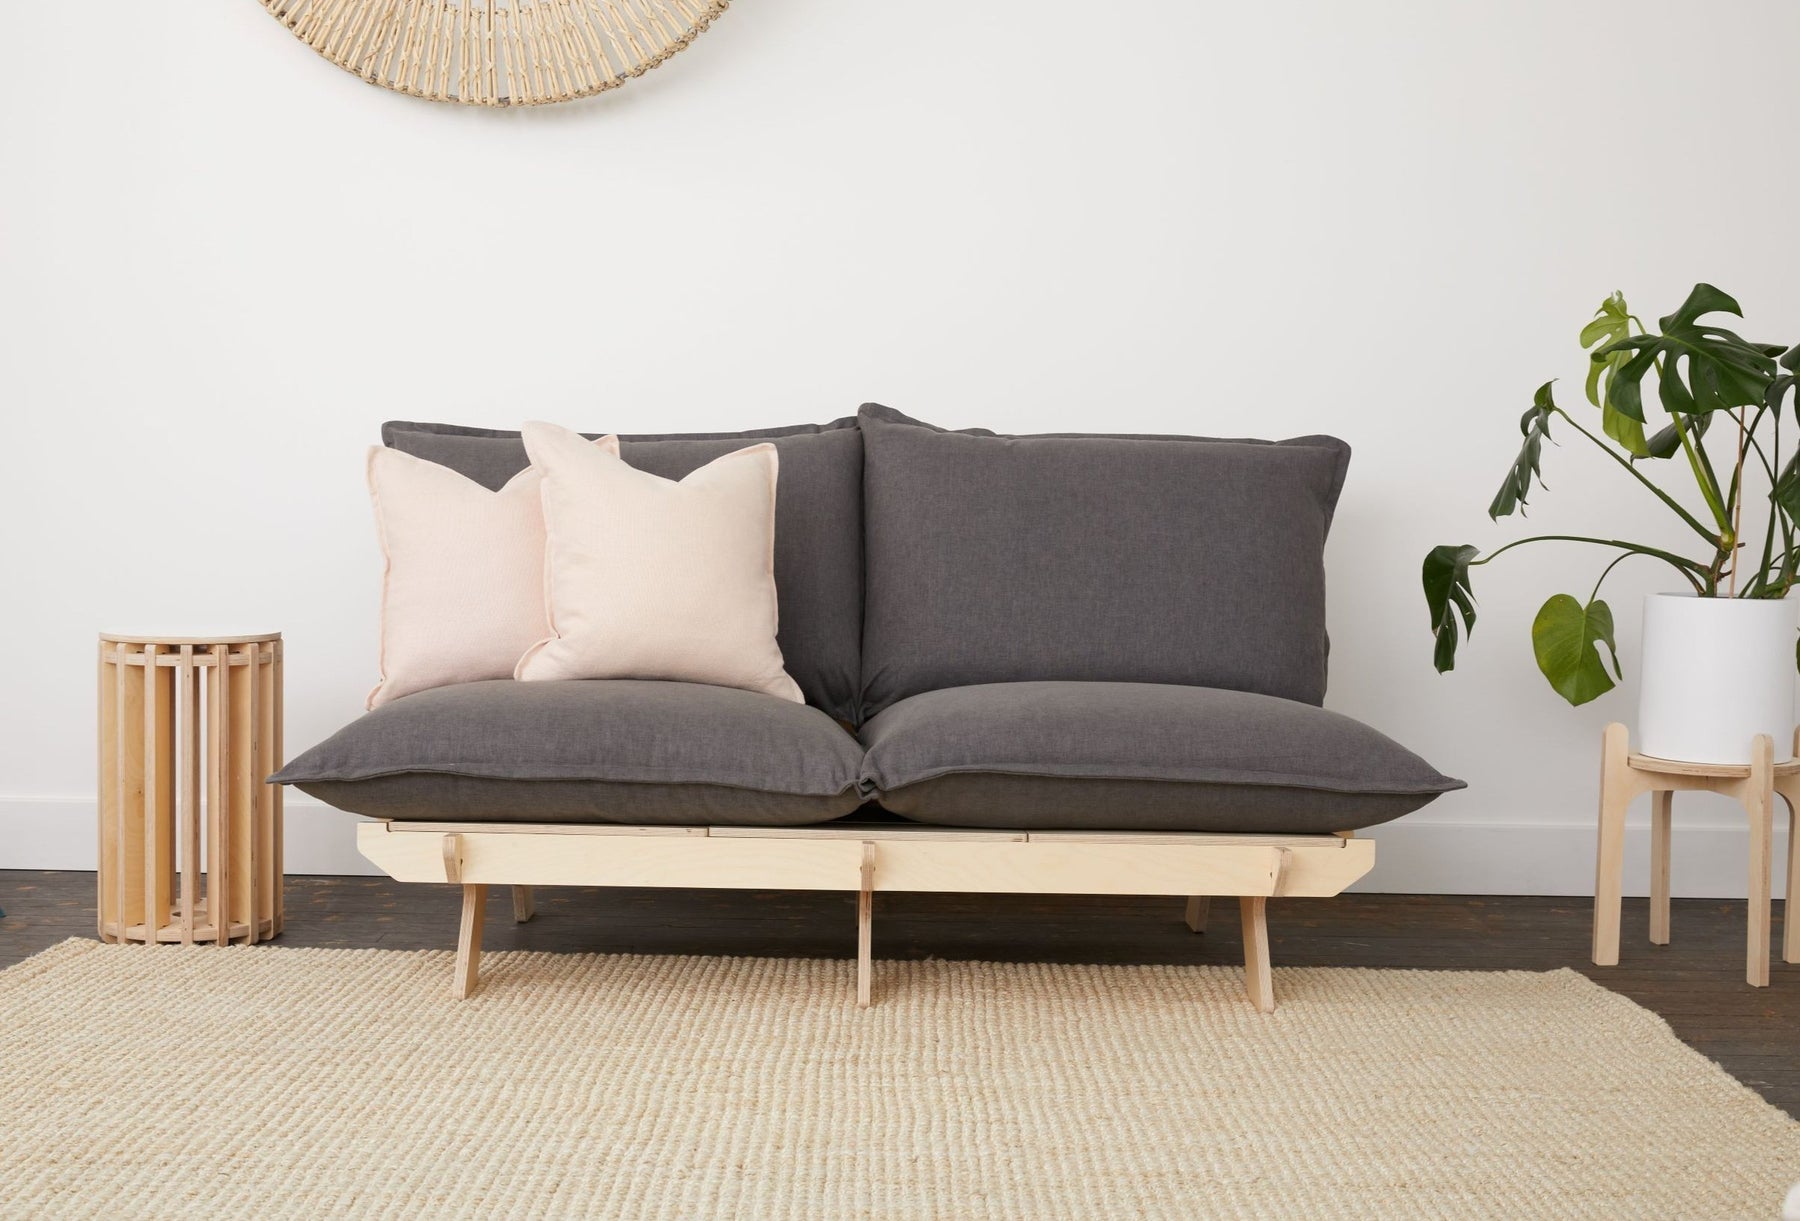 The outrageously awesome benefits of buying Aussie-made furniture